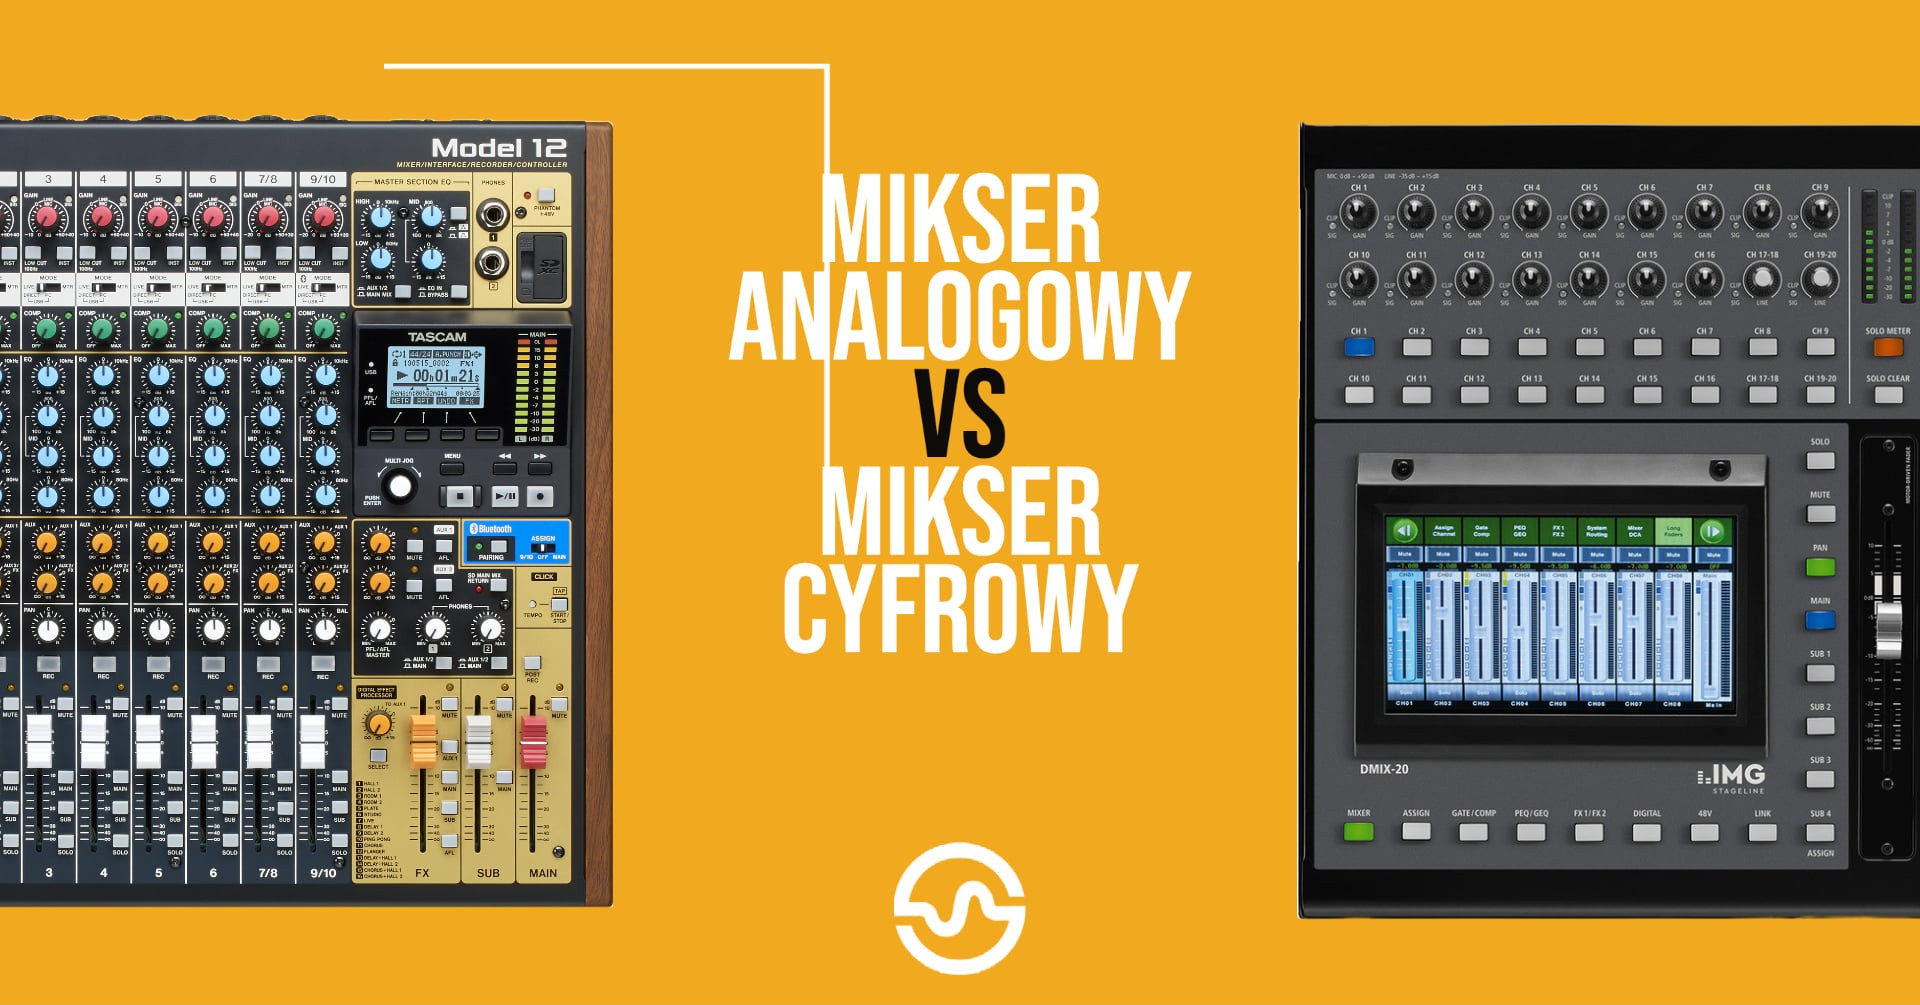 Mikser analogowy vs mikser cyfrowy